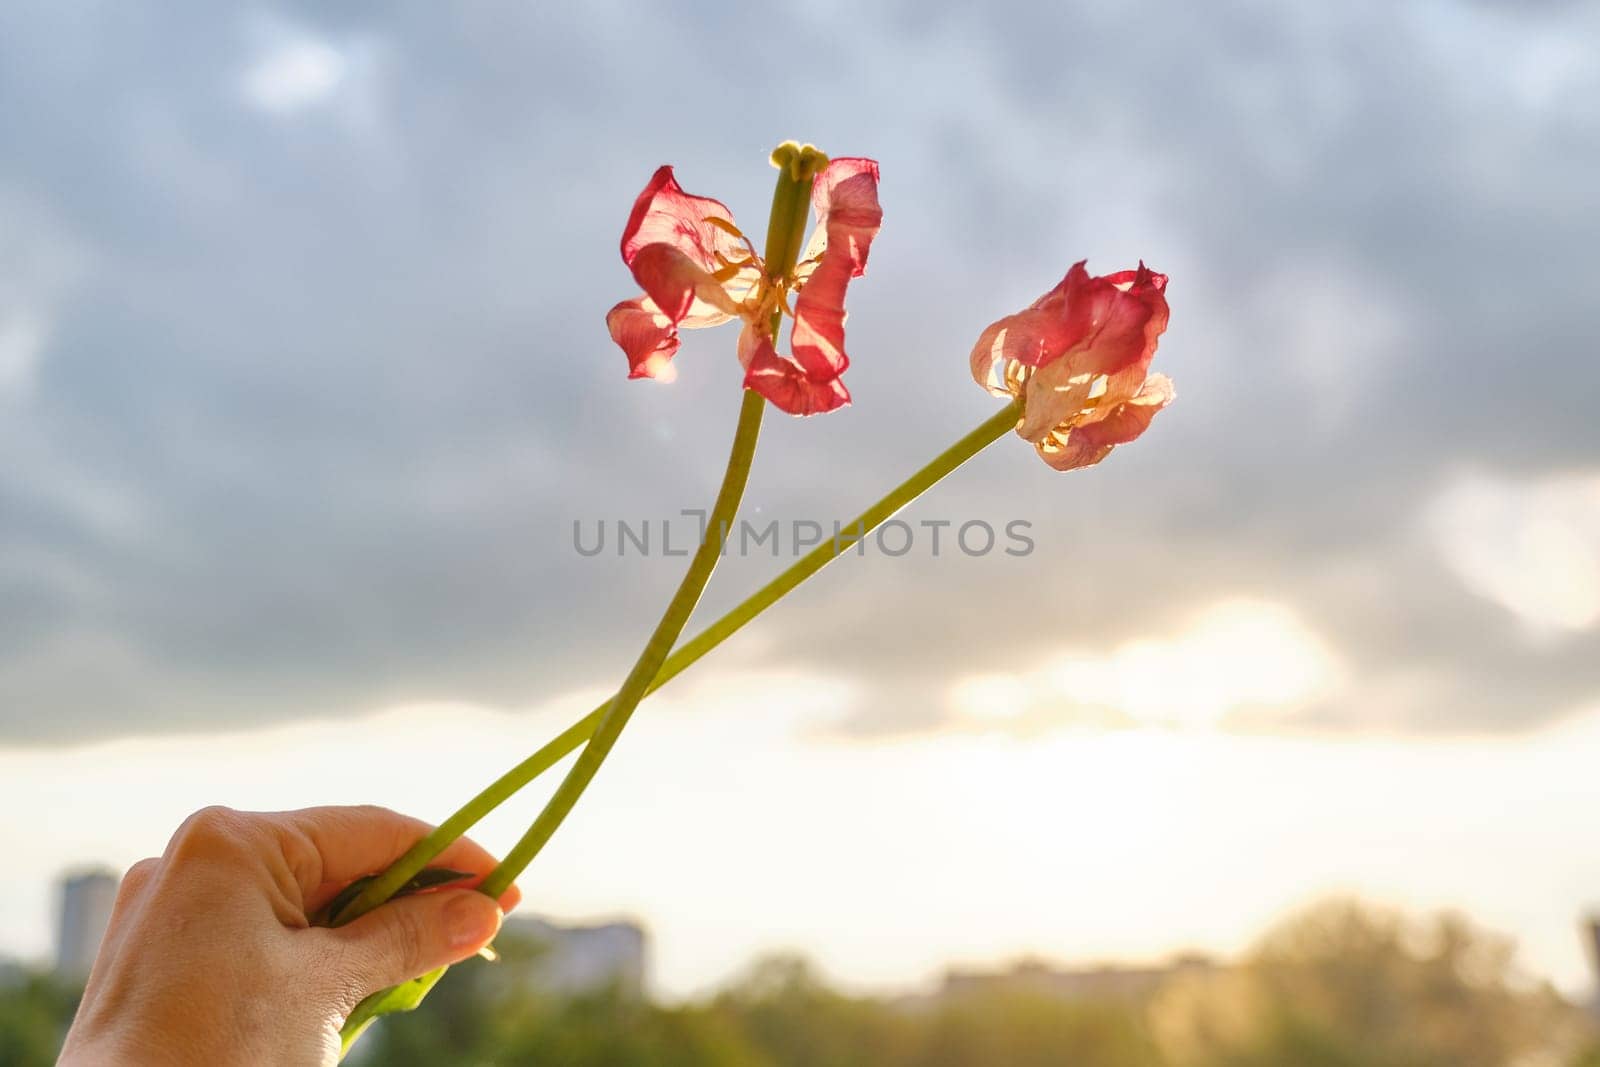 Two withered flowers of tulips in hand woman, dramatic evening sunset sky with clouds.